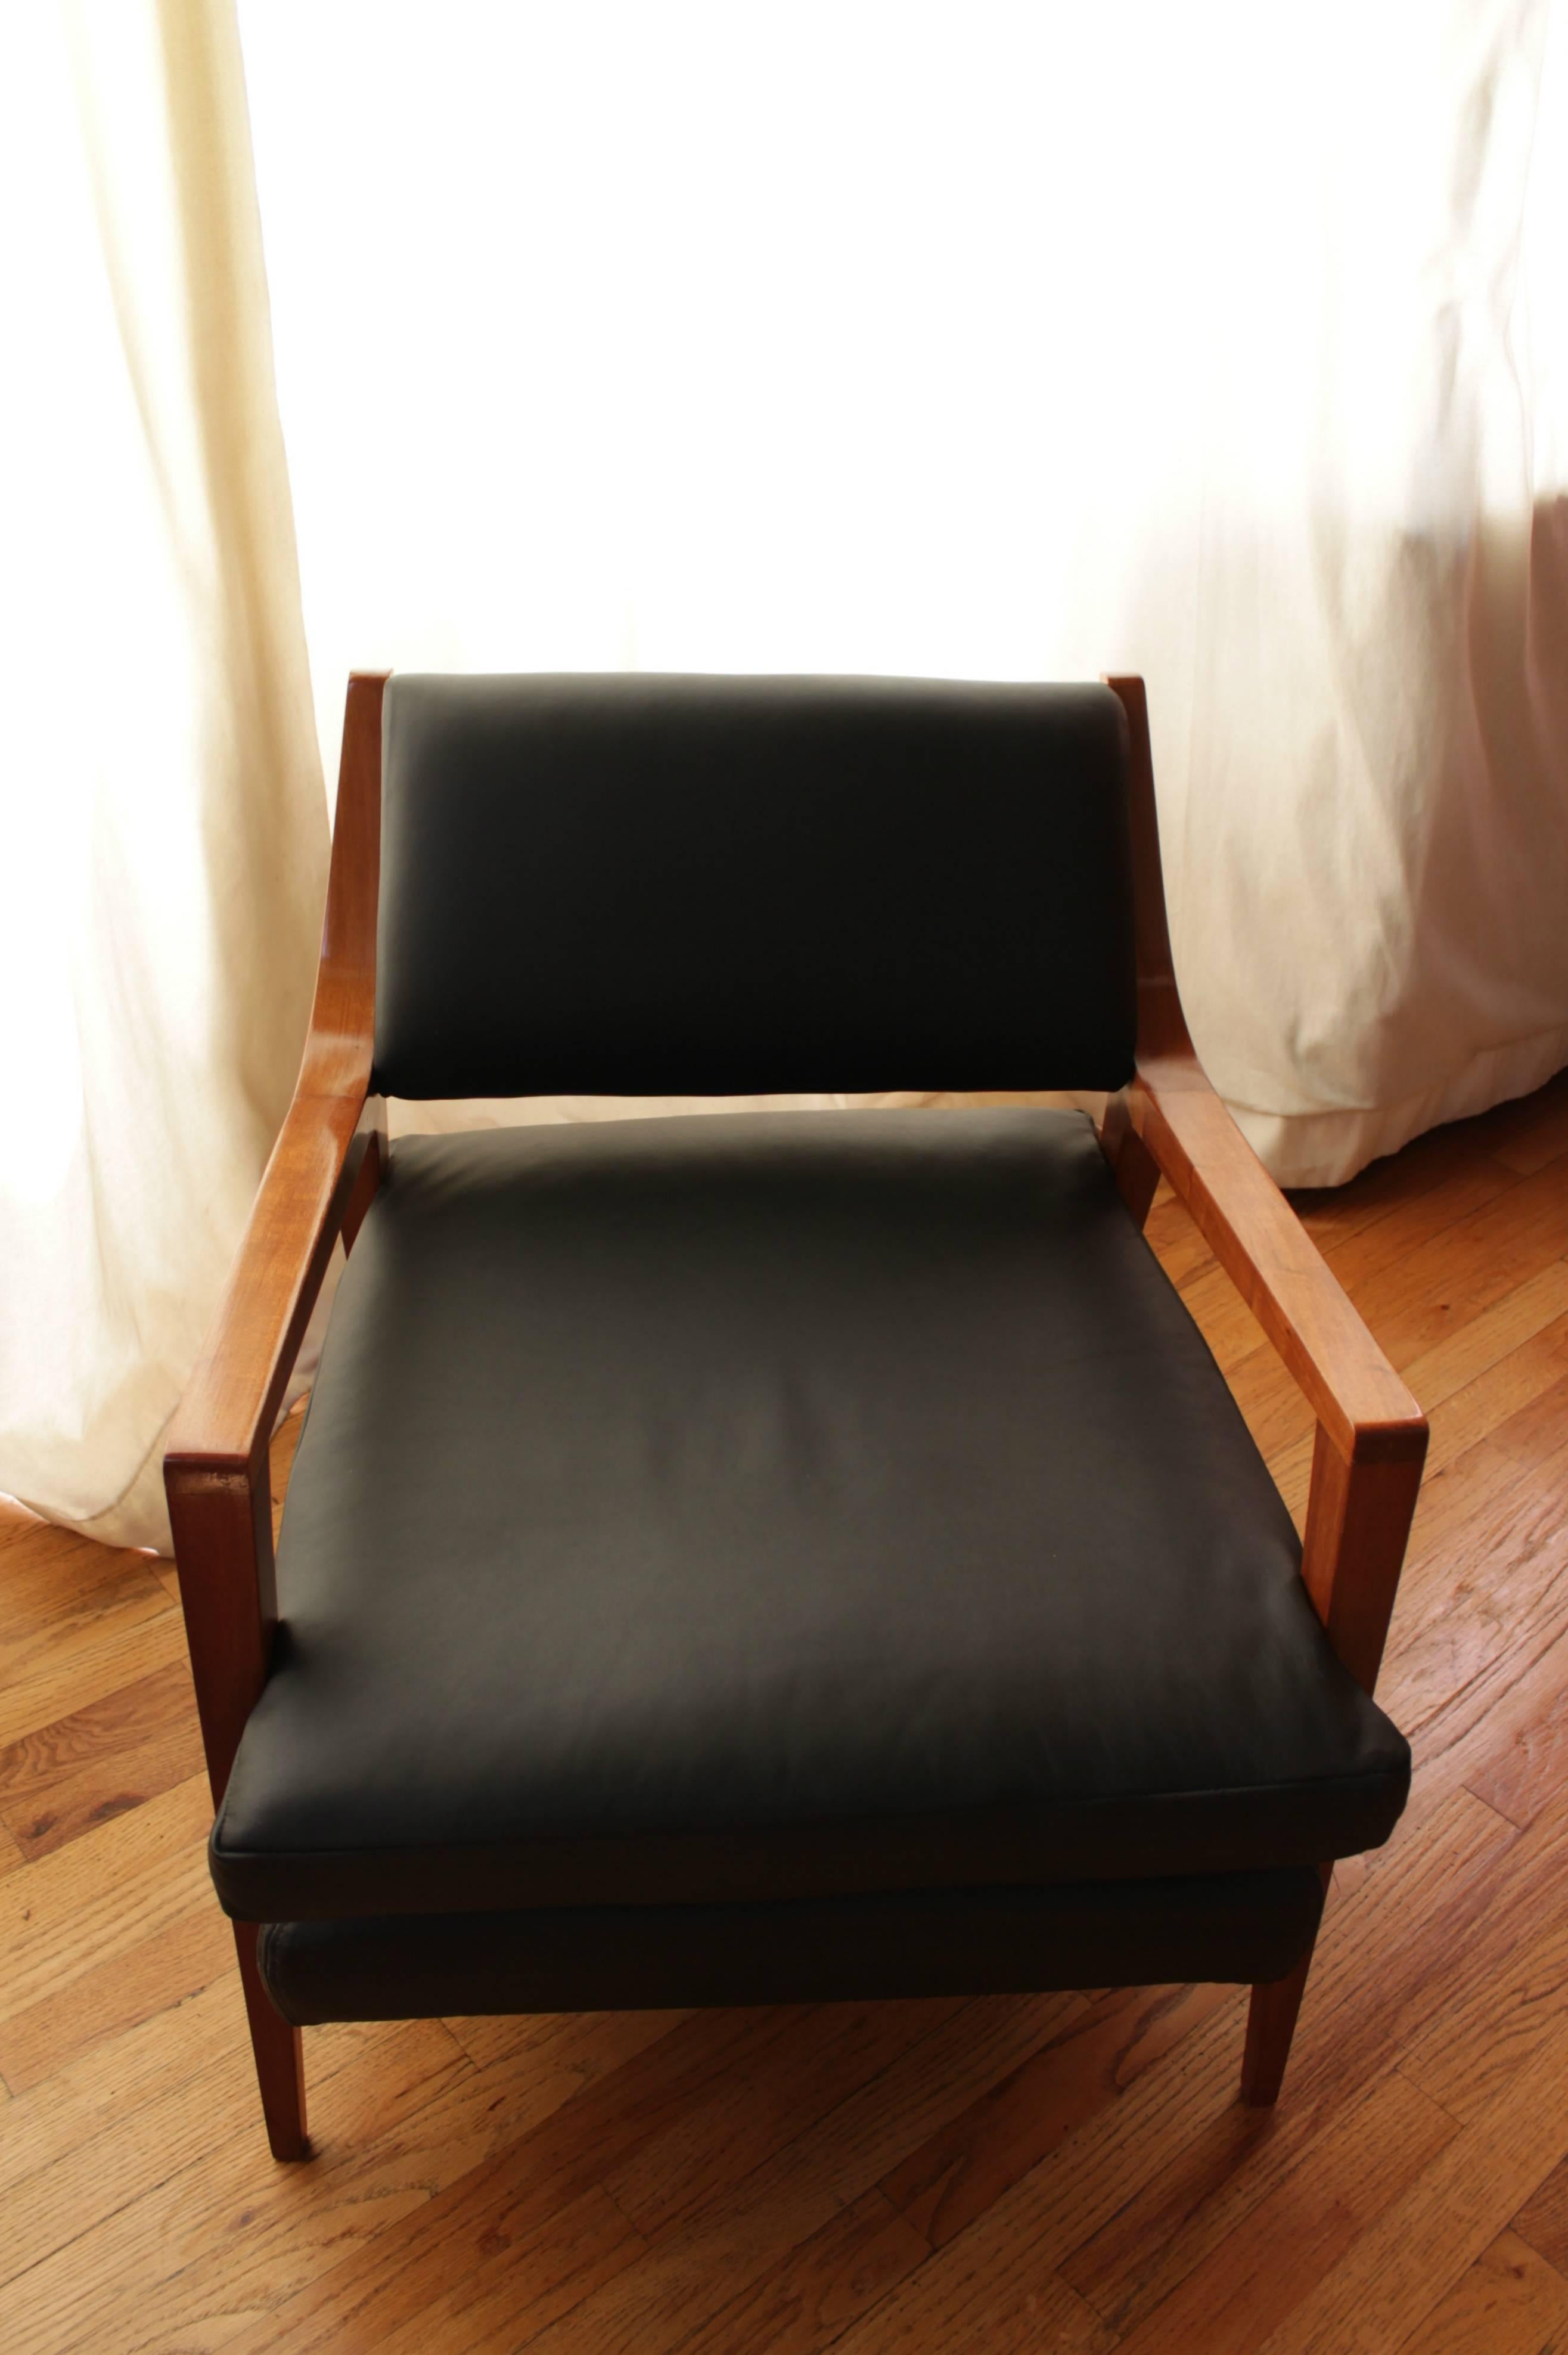 Pair of Van Beuren chairs made of mahogany wood with black leather seats.